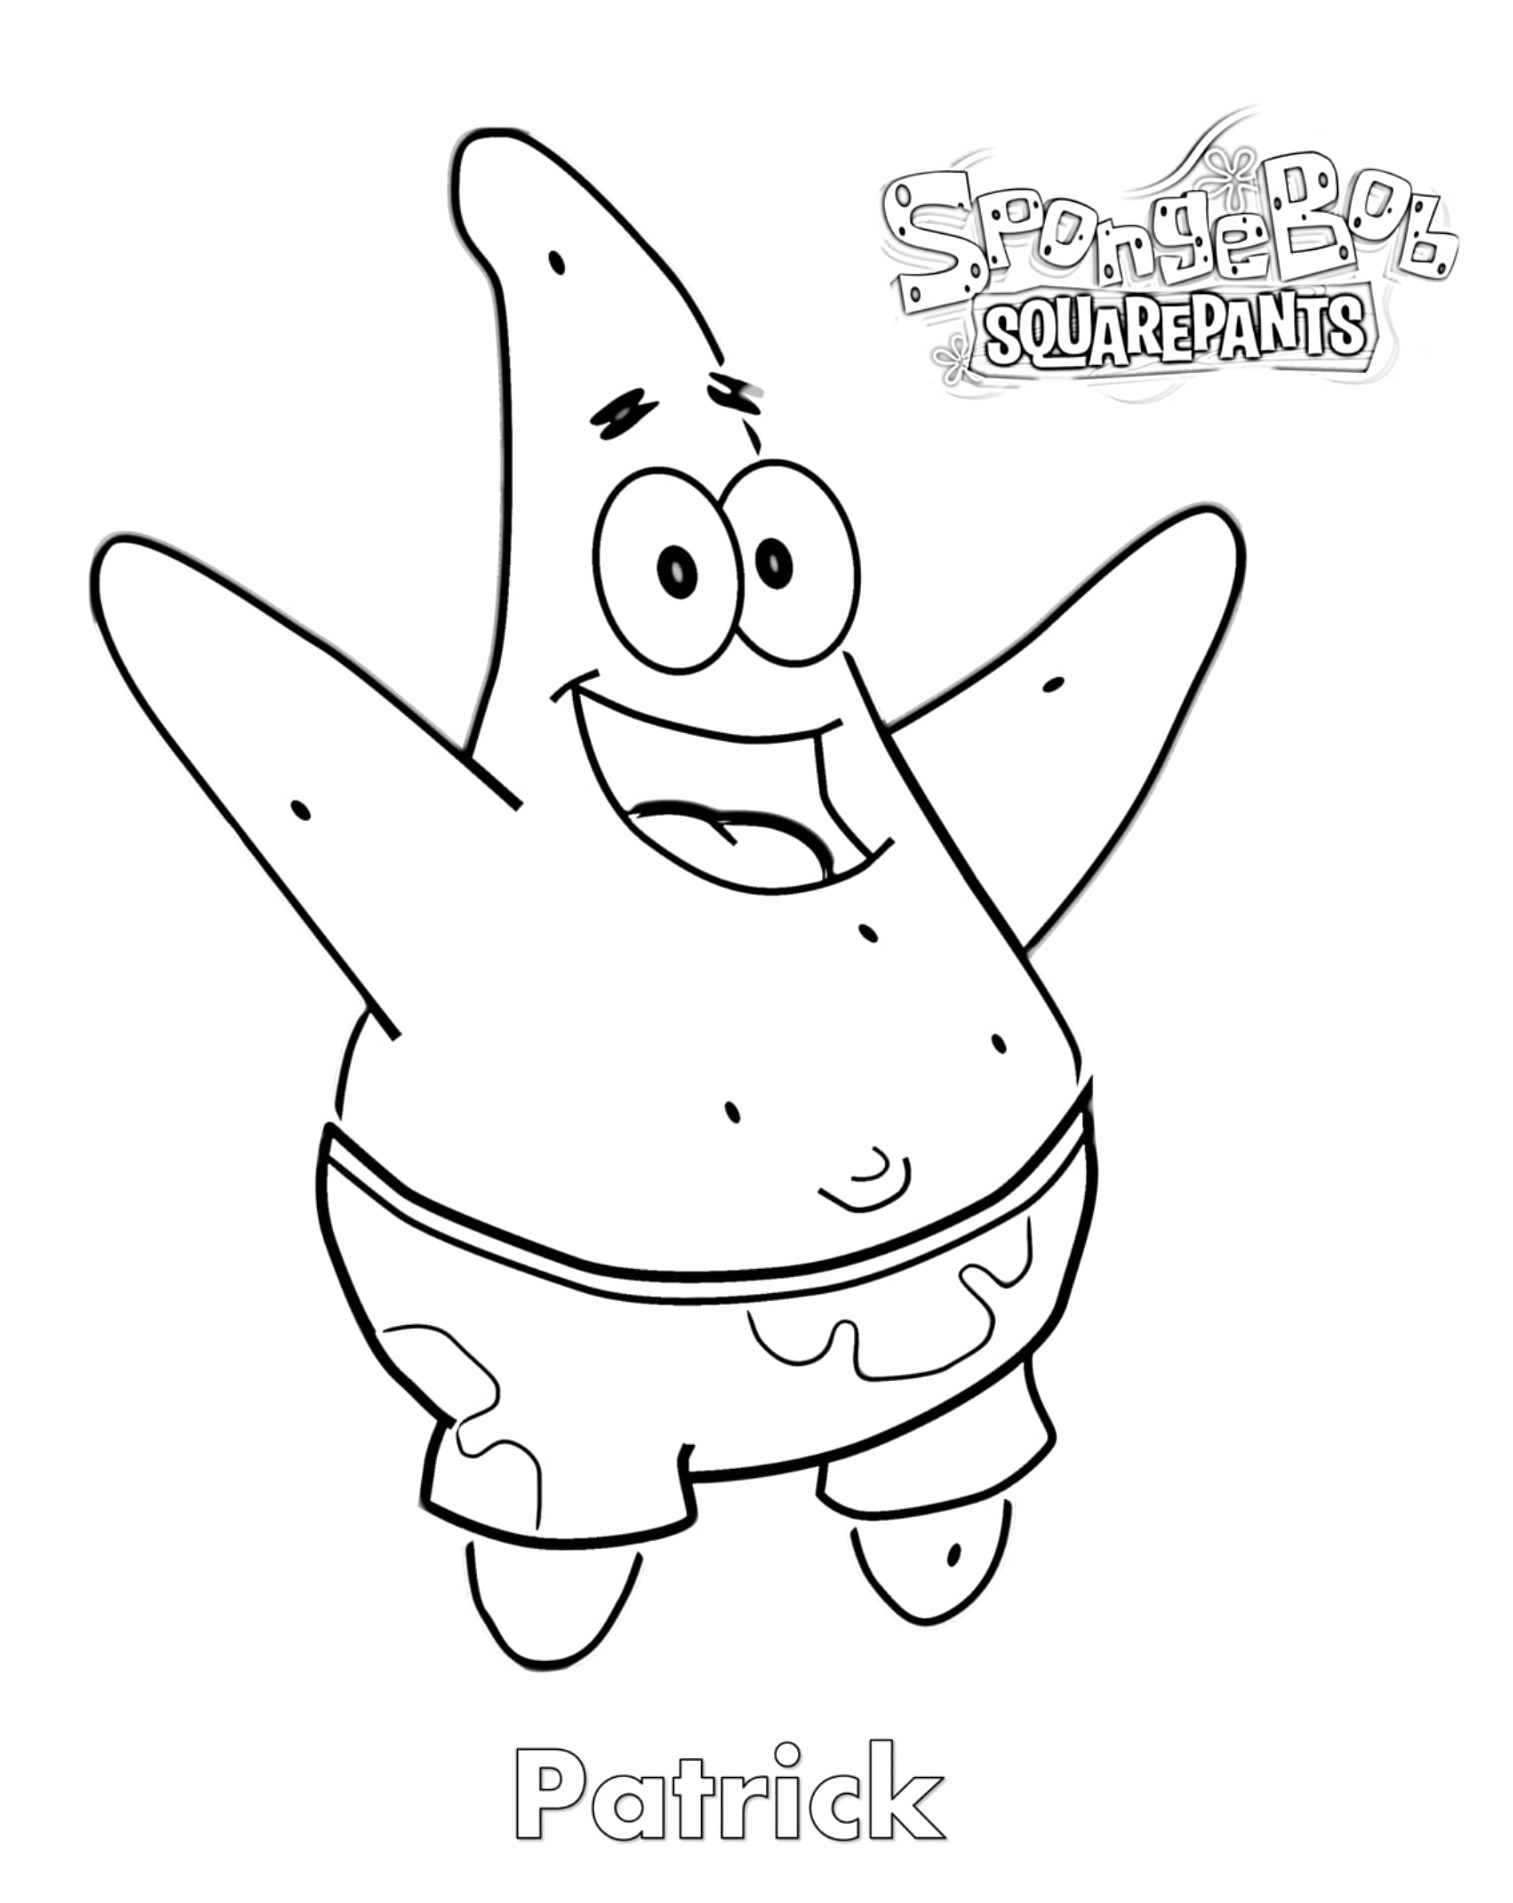 Patrick From Spongebob Coloring Page